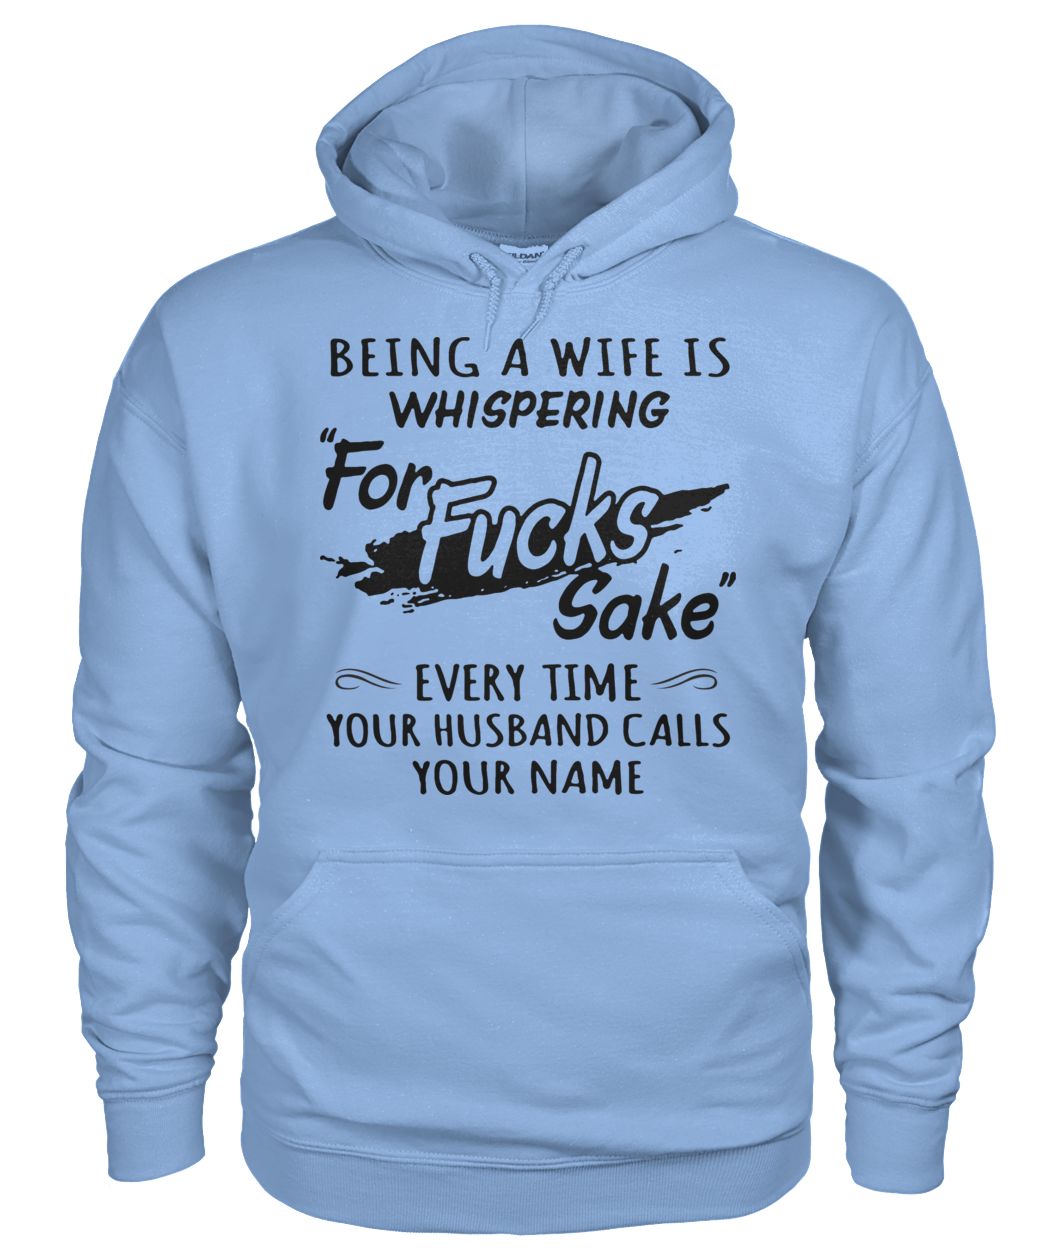 Being a wife is whispering for fucks fake every time your husband call your name gildan hoodie